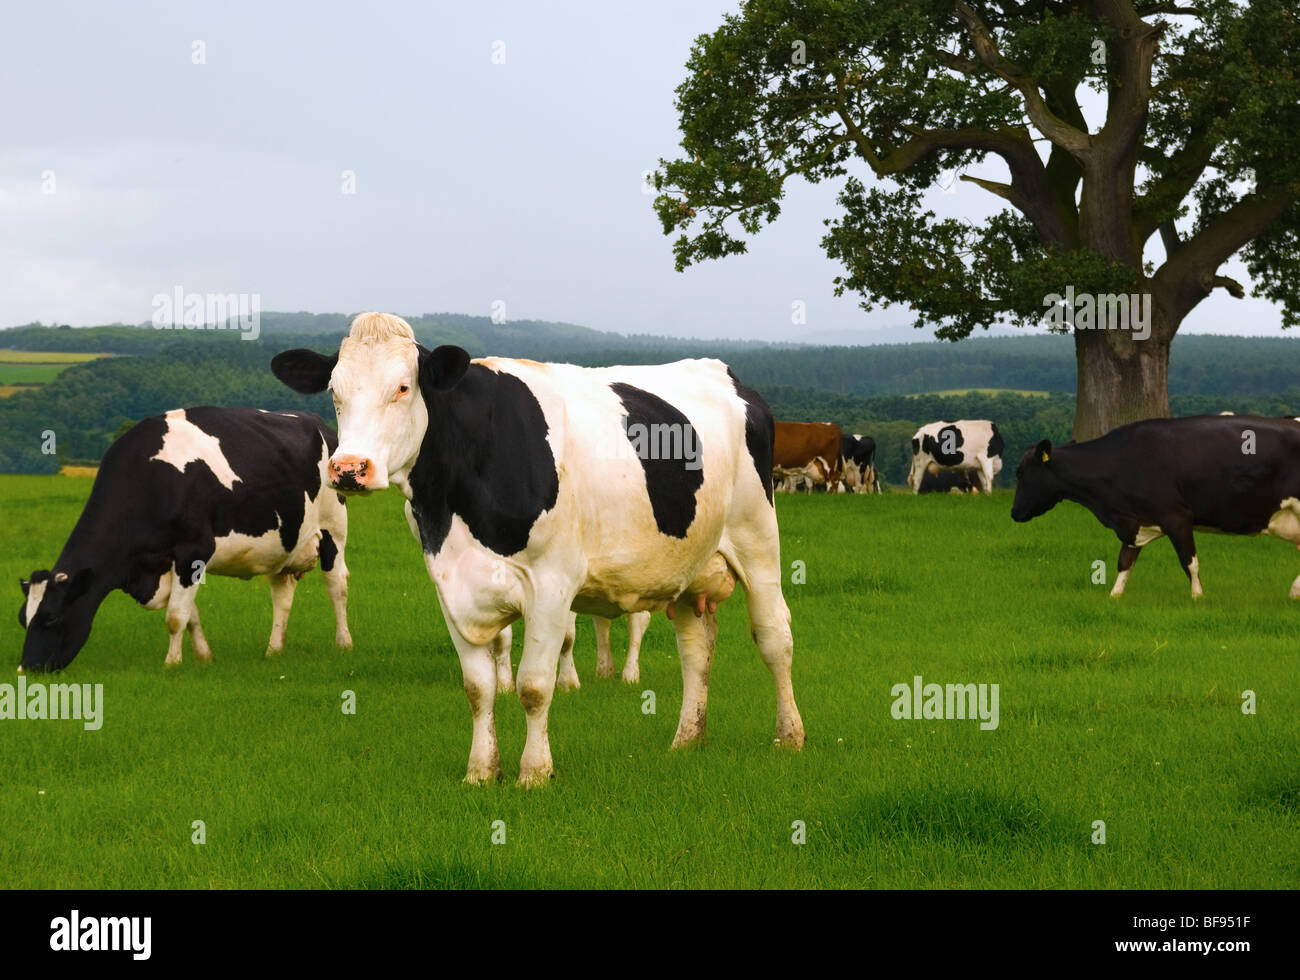 Dairy cows in a lush green field Stock Photo